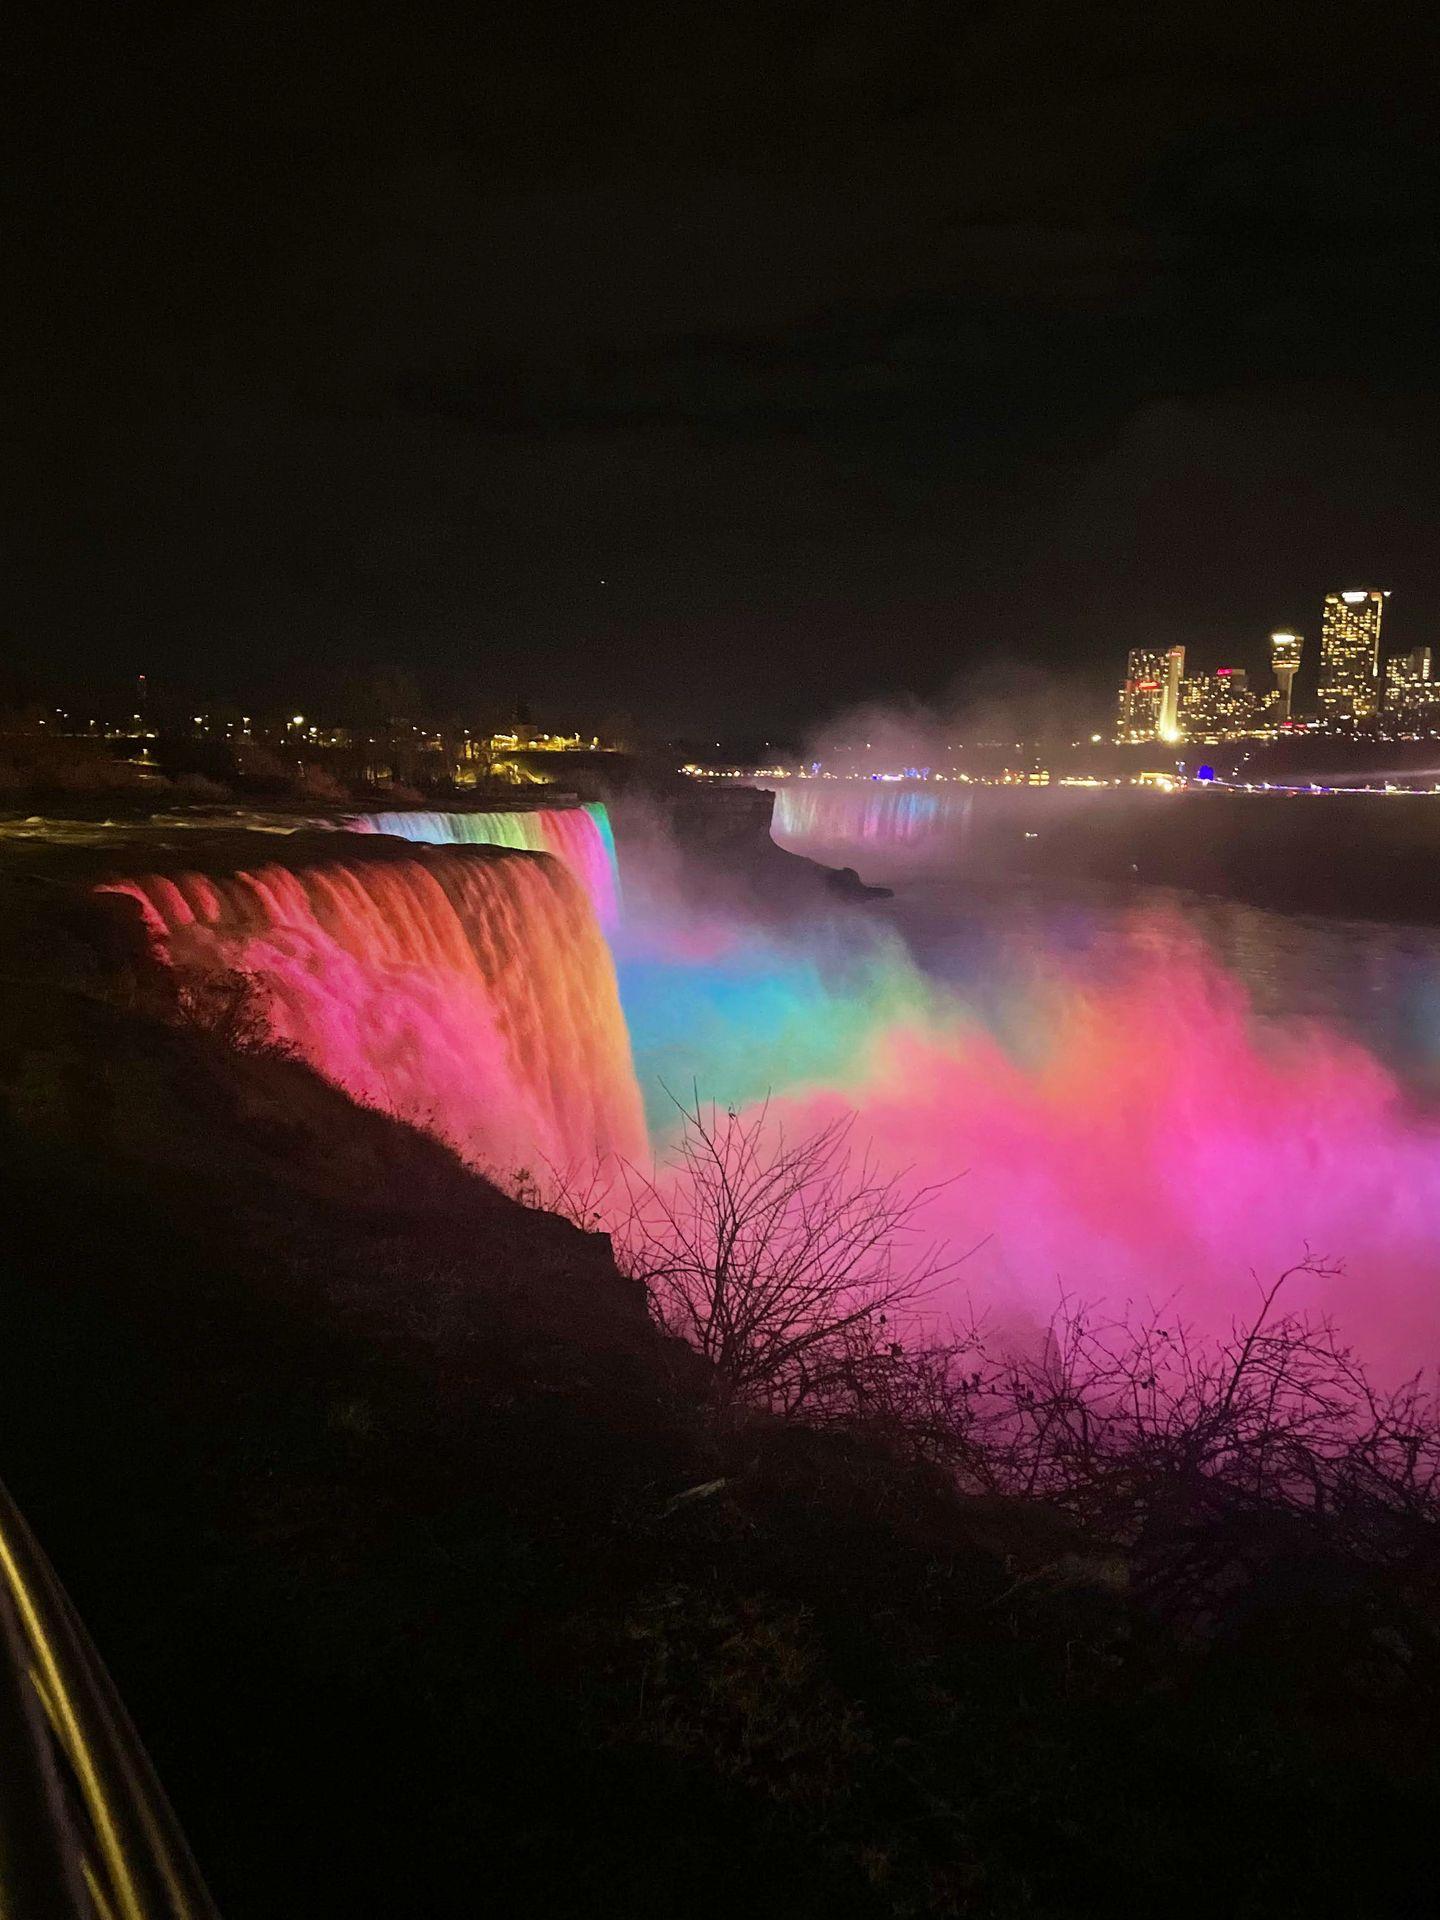 American Falls lit up with rainbow lights at night.